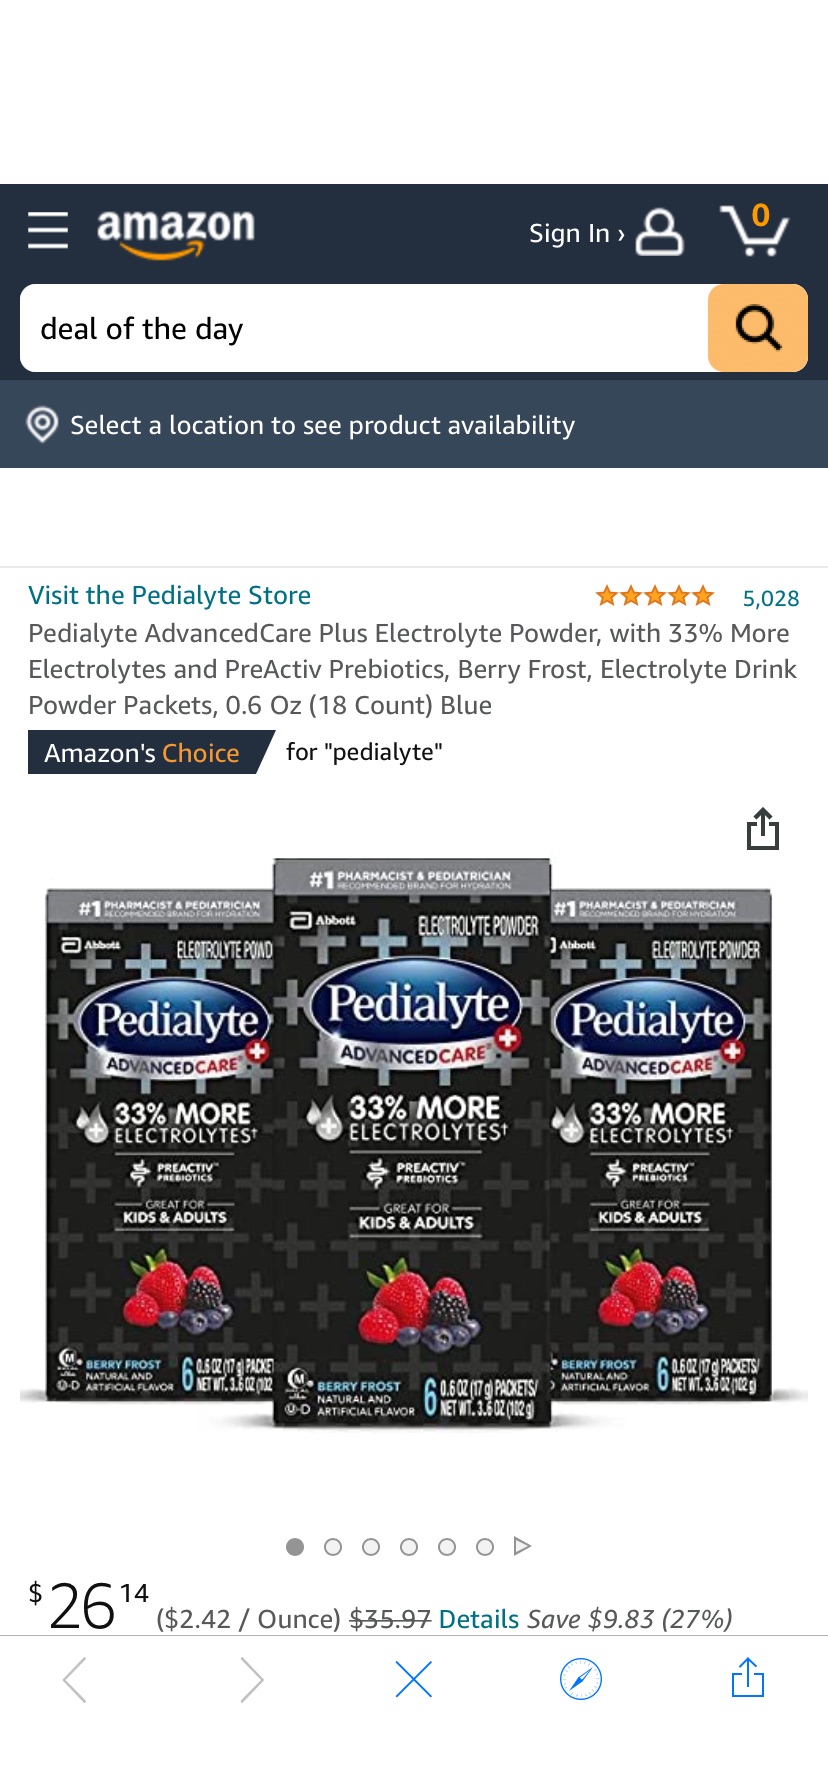 Amazon.com: Pedialyte AdvancedCare Plus Electrolyte Powder, with 33% More Electrolytes and PreActiv Prebiotics, Berry Frost, Electrolyte Drink Powder Packets补充剂